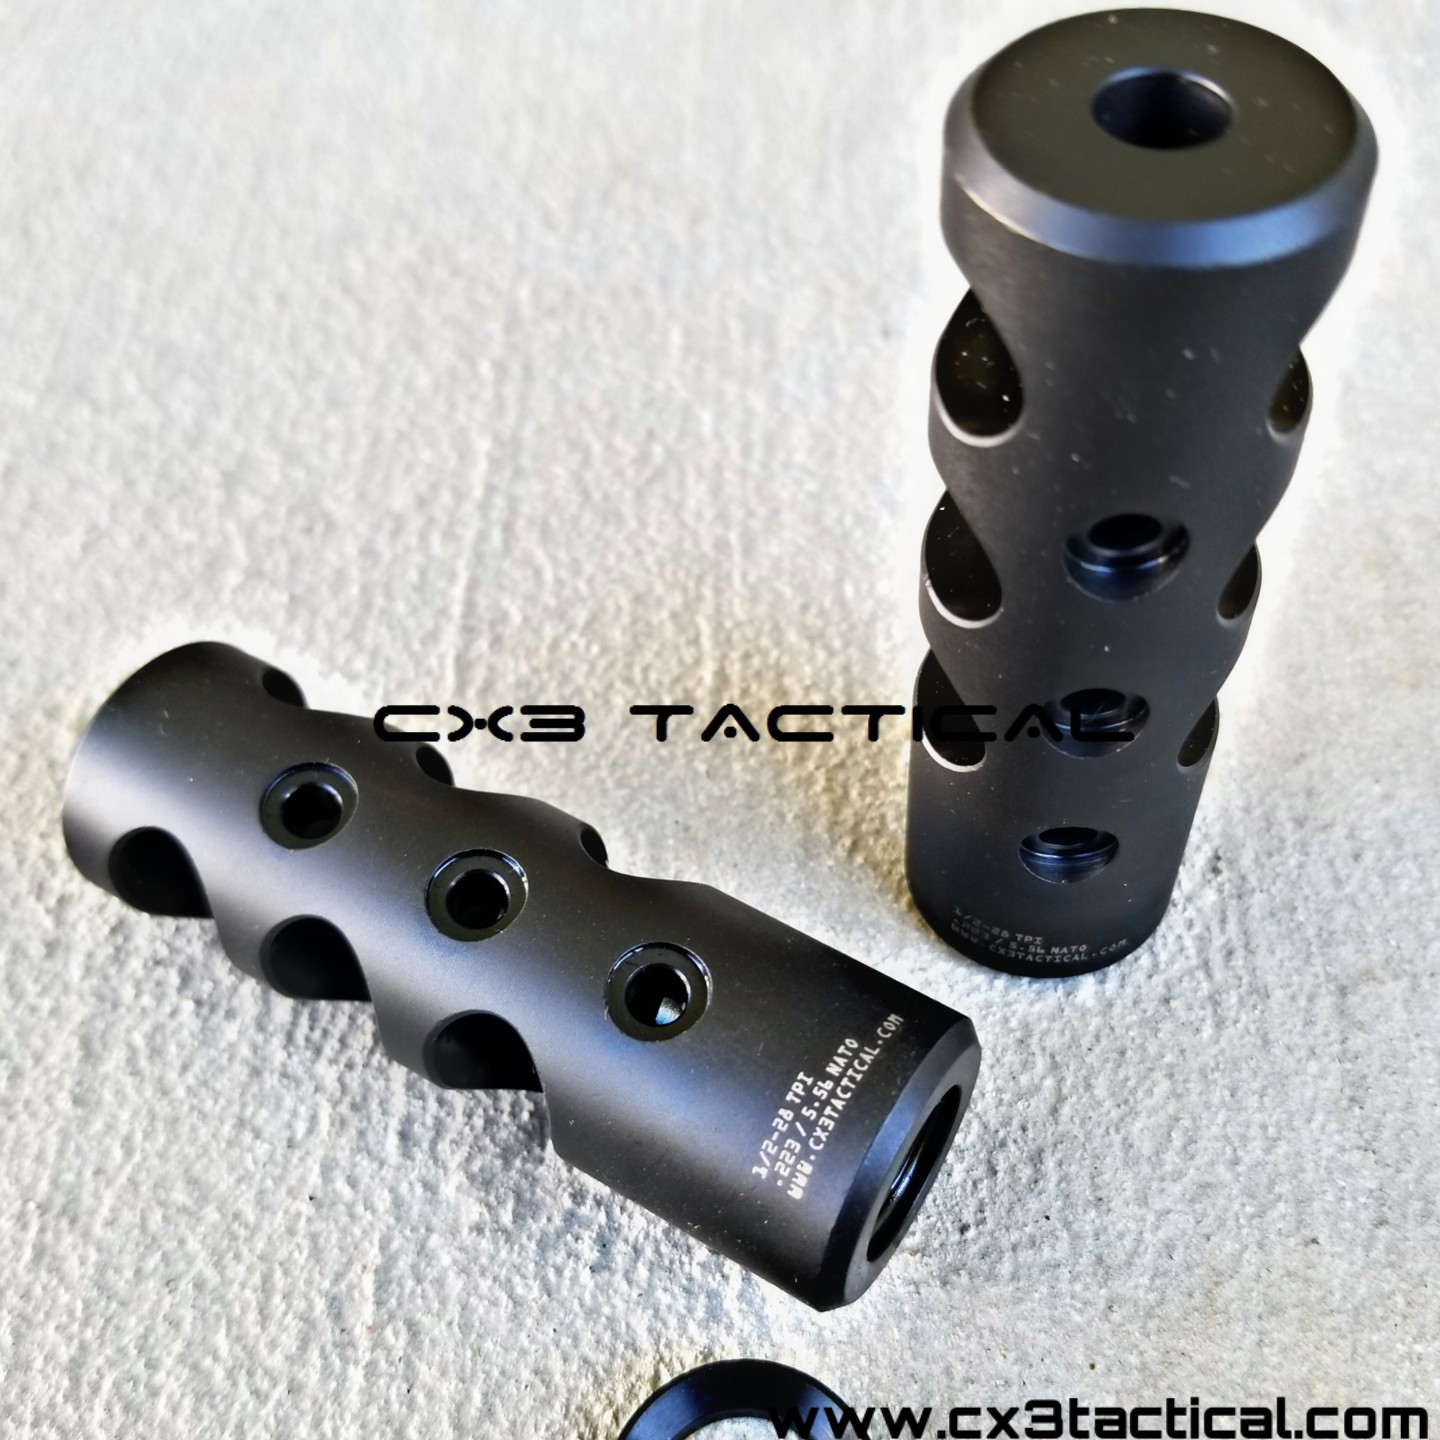 Stainless 1/2x28 Threaded Muzzle Brake Compensator 223 556 with Crush Washer 